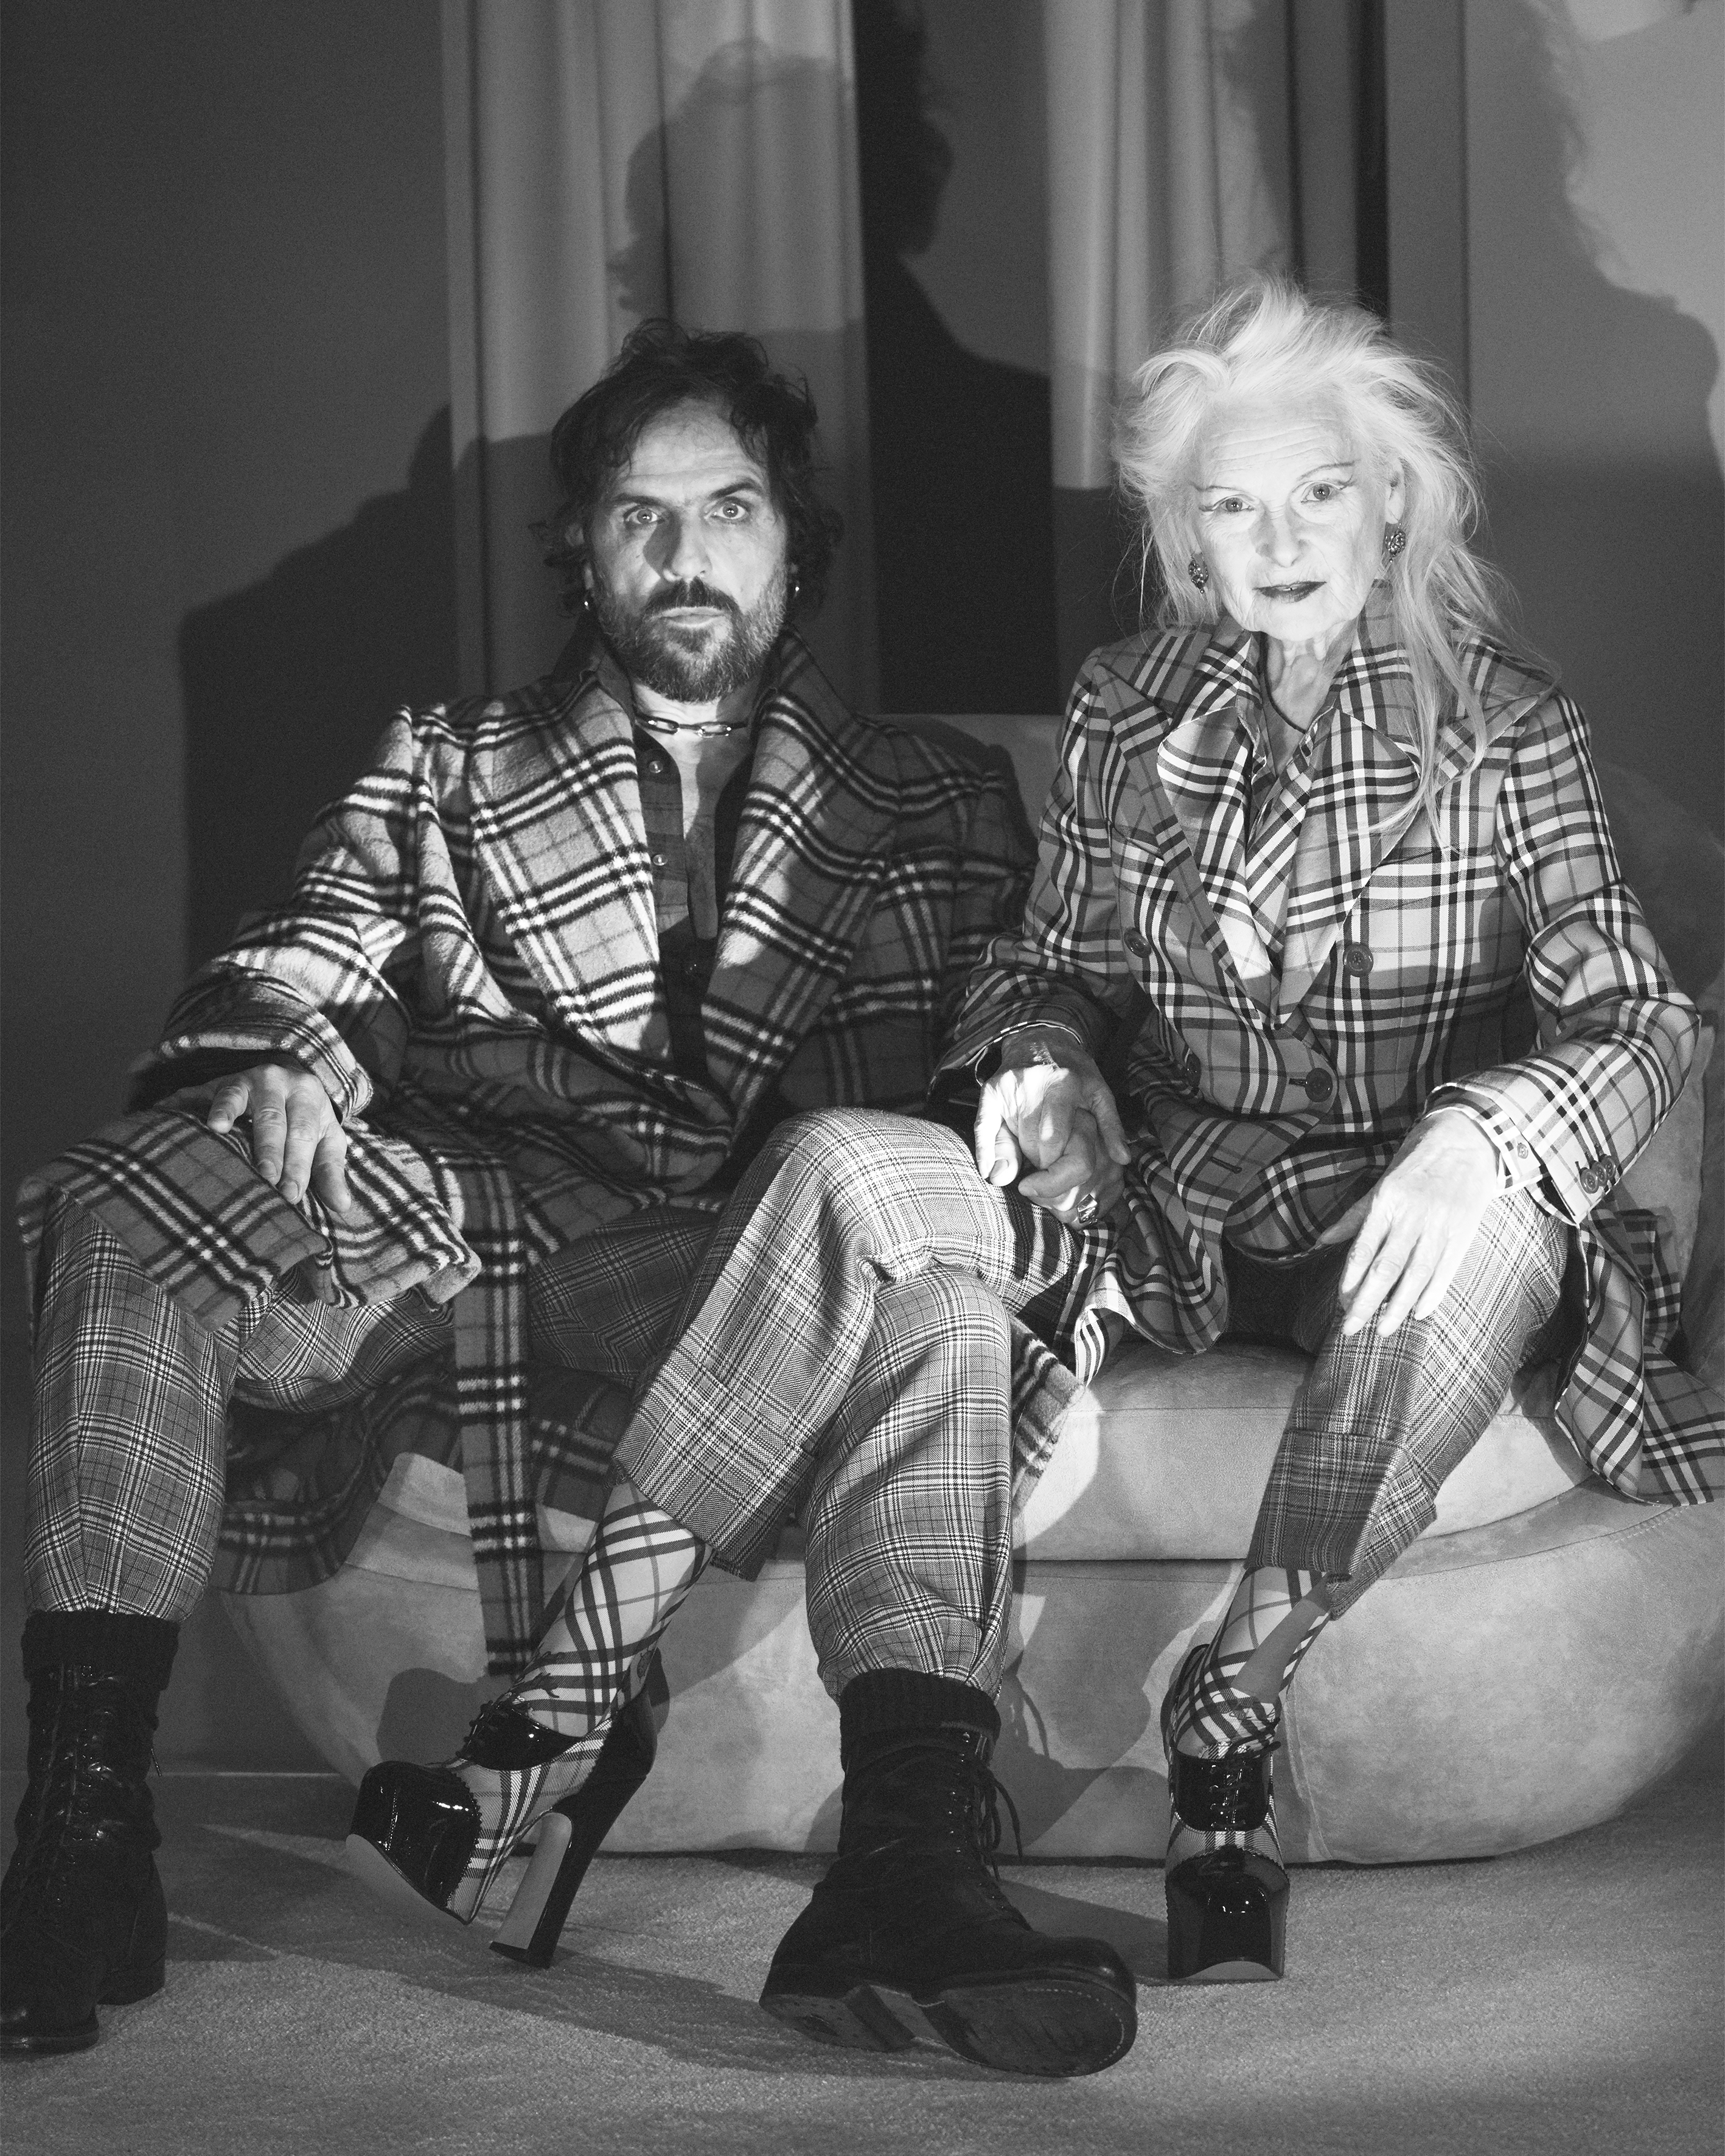 The campaign for the Vivienne Westwood 